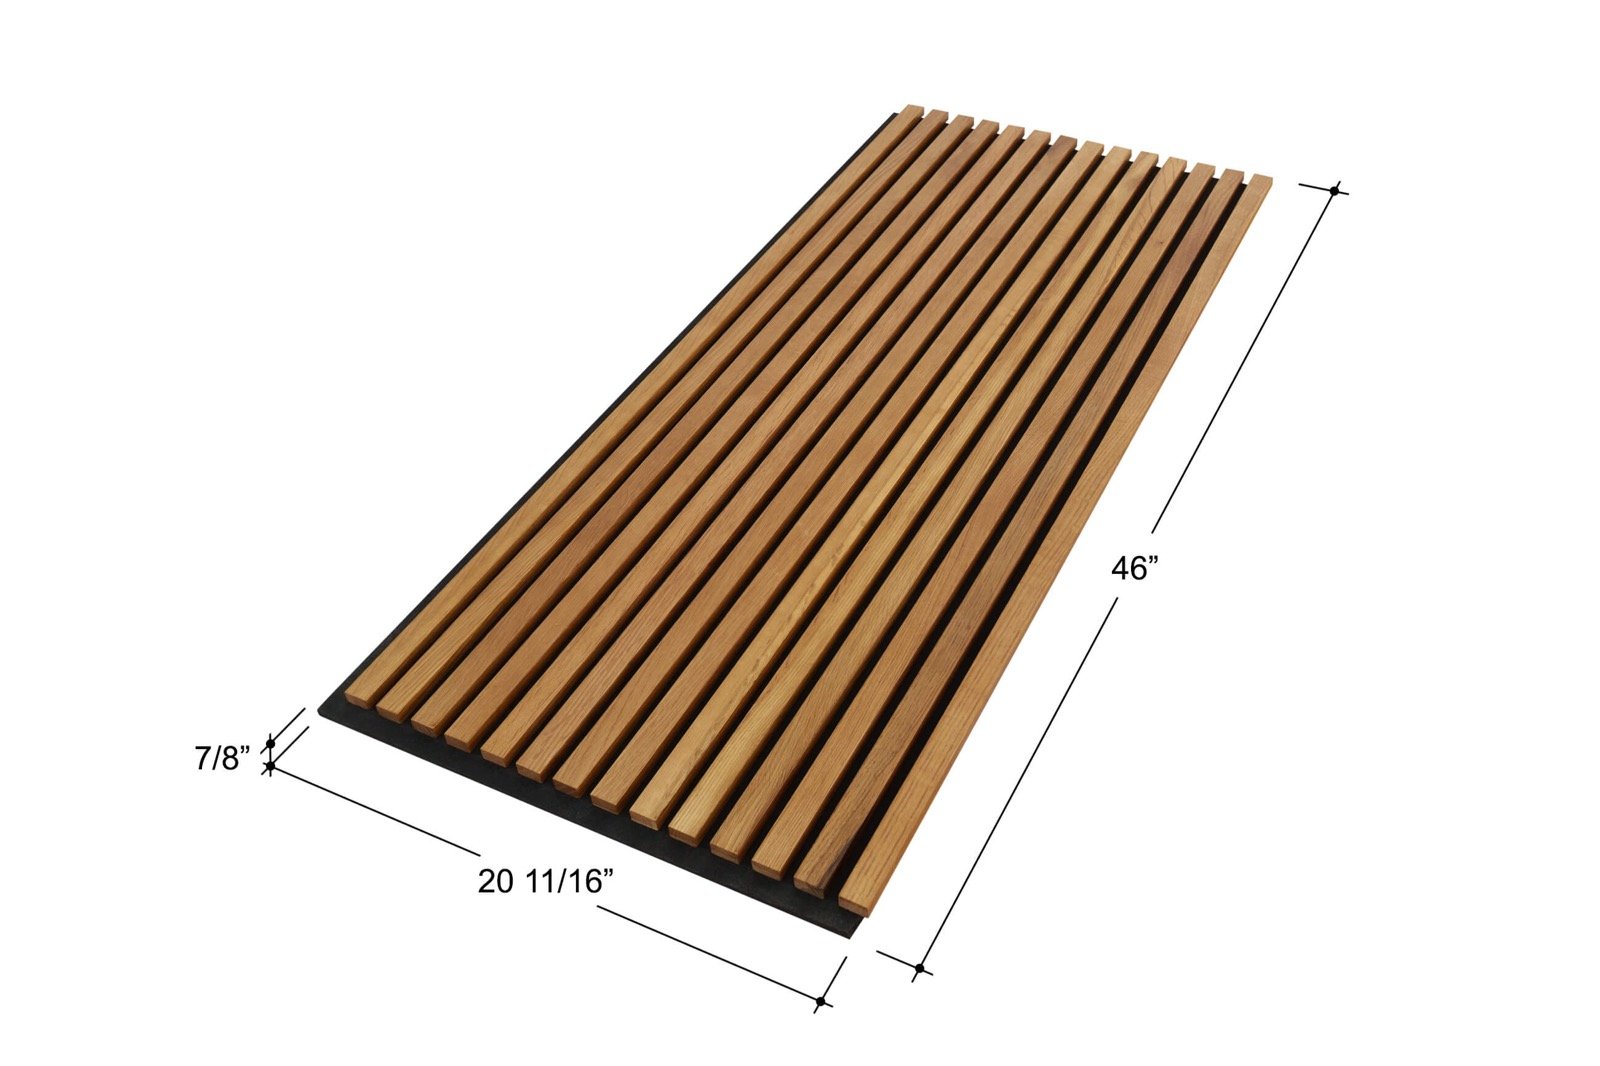 3D Slat Wood Wall Panels Acoustic Panels for Interior Wall Decor Walnut |  Sound Absorbing Panel | 42.5” x 17” Each | Wall Panels Decorative | Set of  2